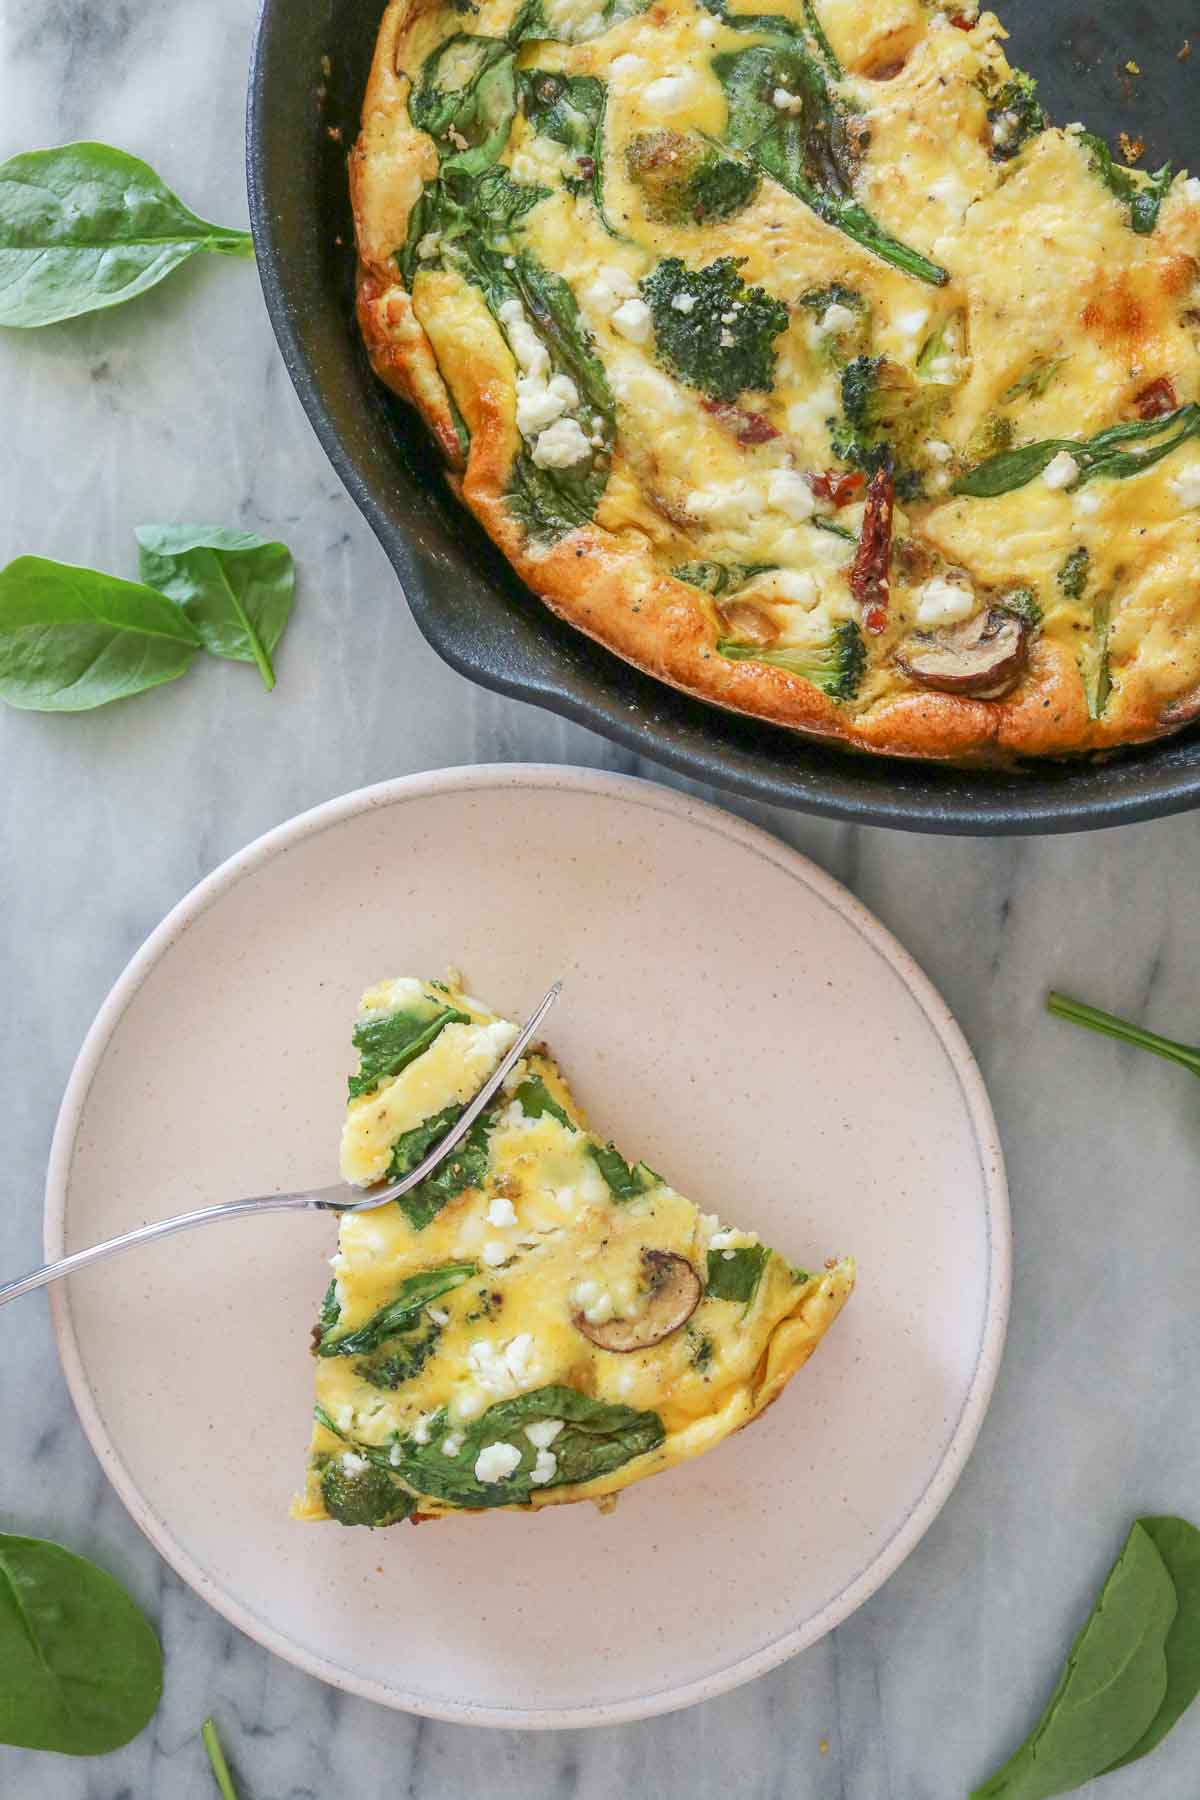 Slice of vegetable frittata on a plate next to a skillet of the frittata.